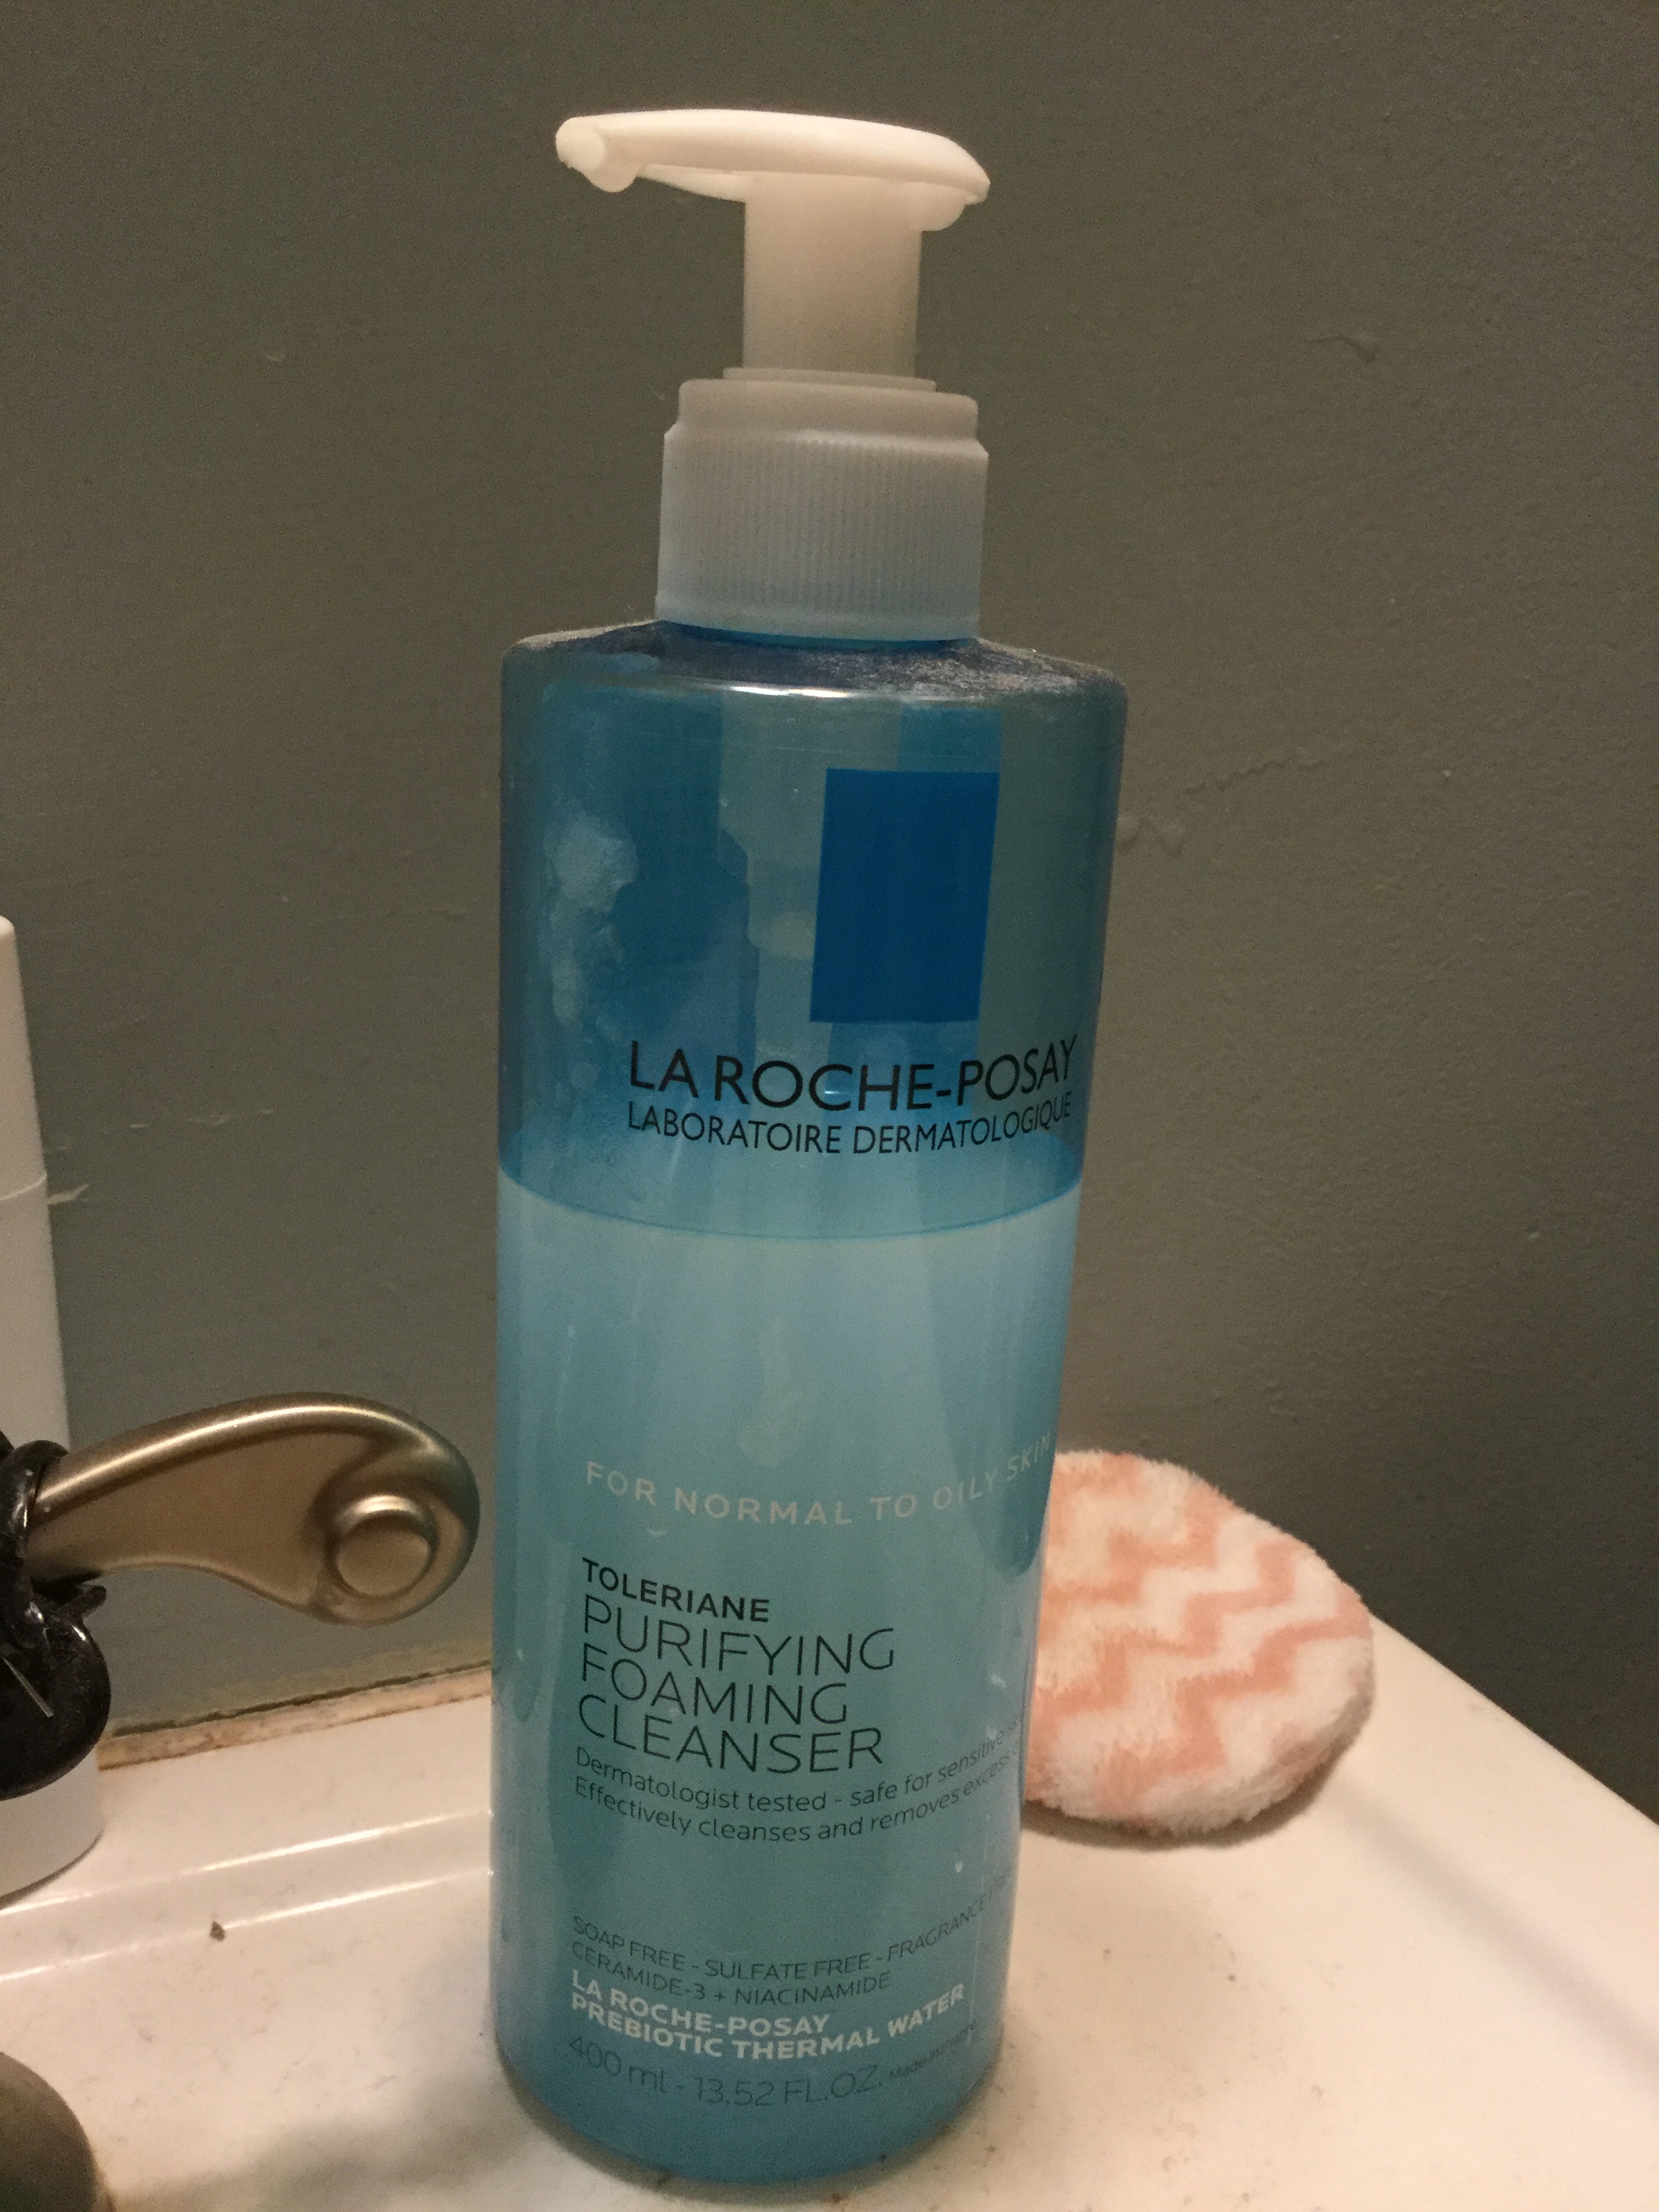 kalligrafi alarm Hør efter Using the La Roche Posay Toleriane Purifying Foaming Cleanser – Ms. Mimsy  Reviews